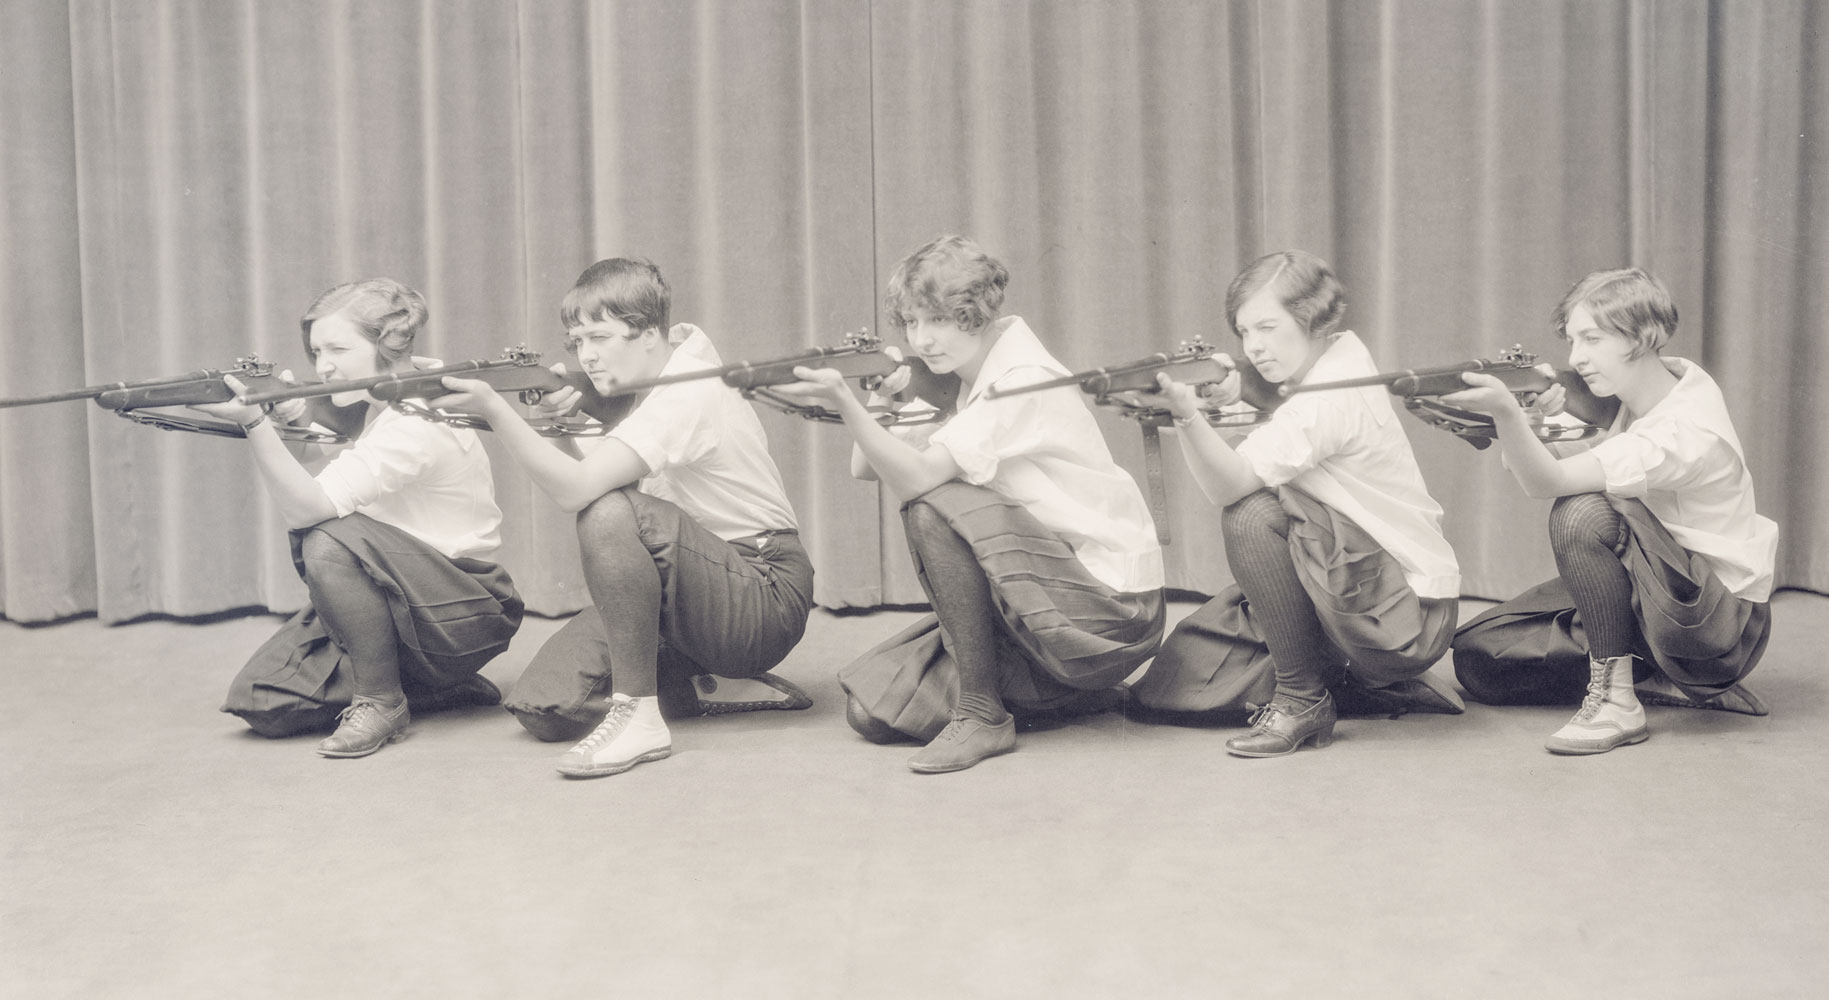 A black and white image of five women aiming rifles